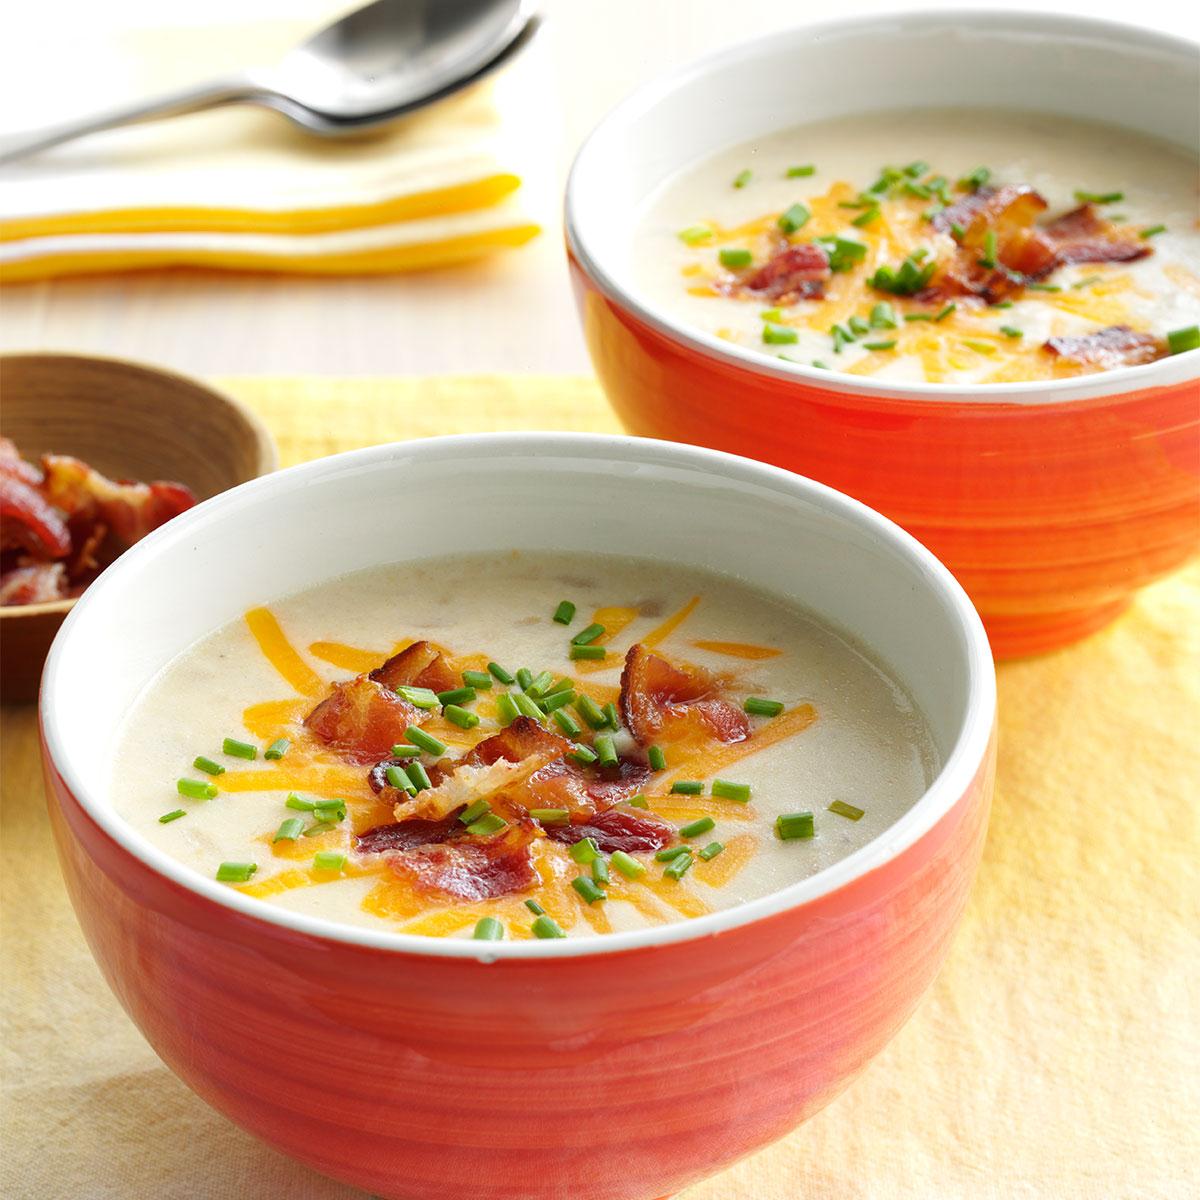 Slow-Cooked Loaded Potato Soup Recipe: How To Make It